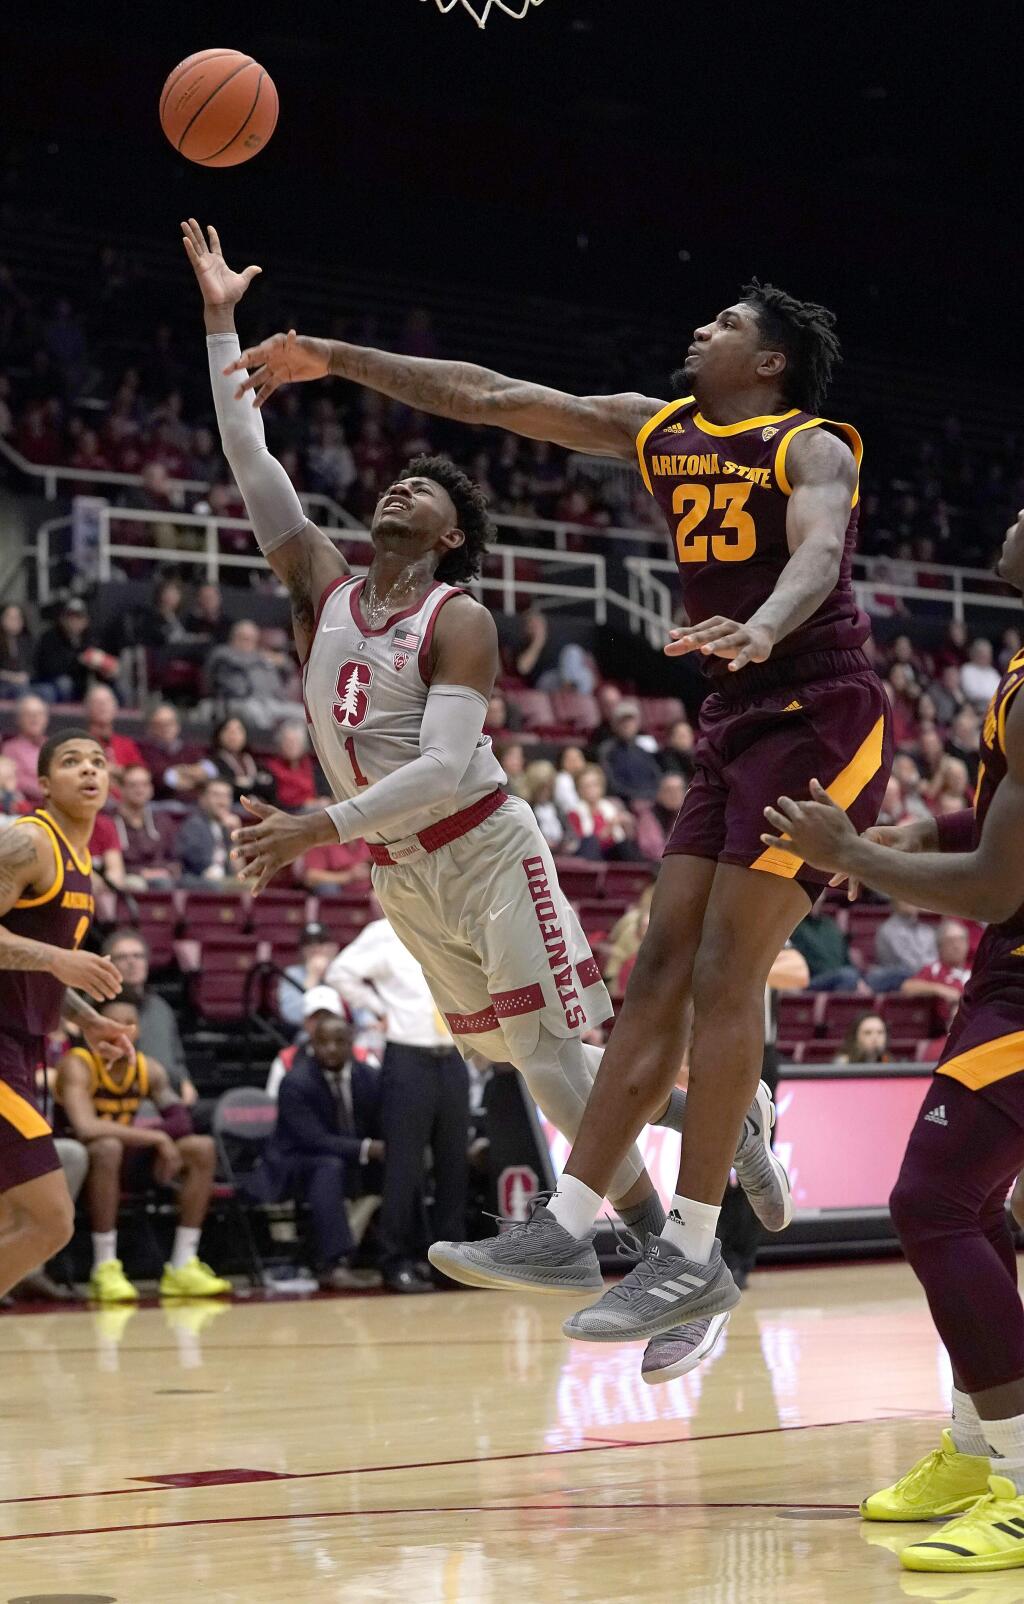 Stanford guard Daejon Davis (1) releases a shot next to Arizona State forward Romello White (23) during the first half of an NCAA college basketball game in Stanford, Calif., Saturday, Jan. 12, 2019. (AP Photo/Tony Avelar)